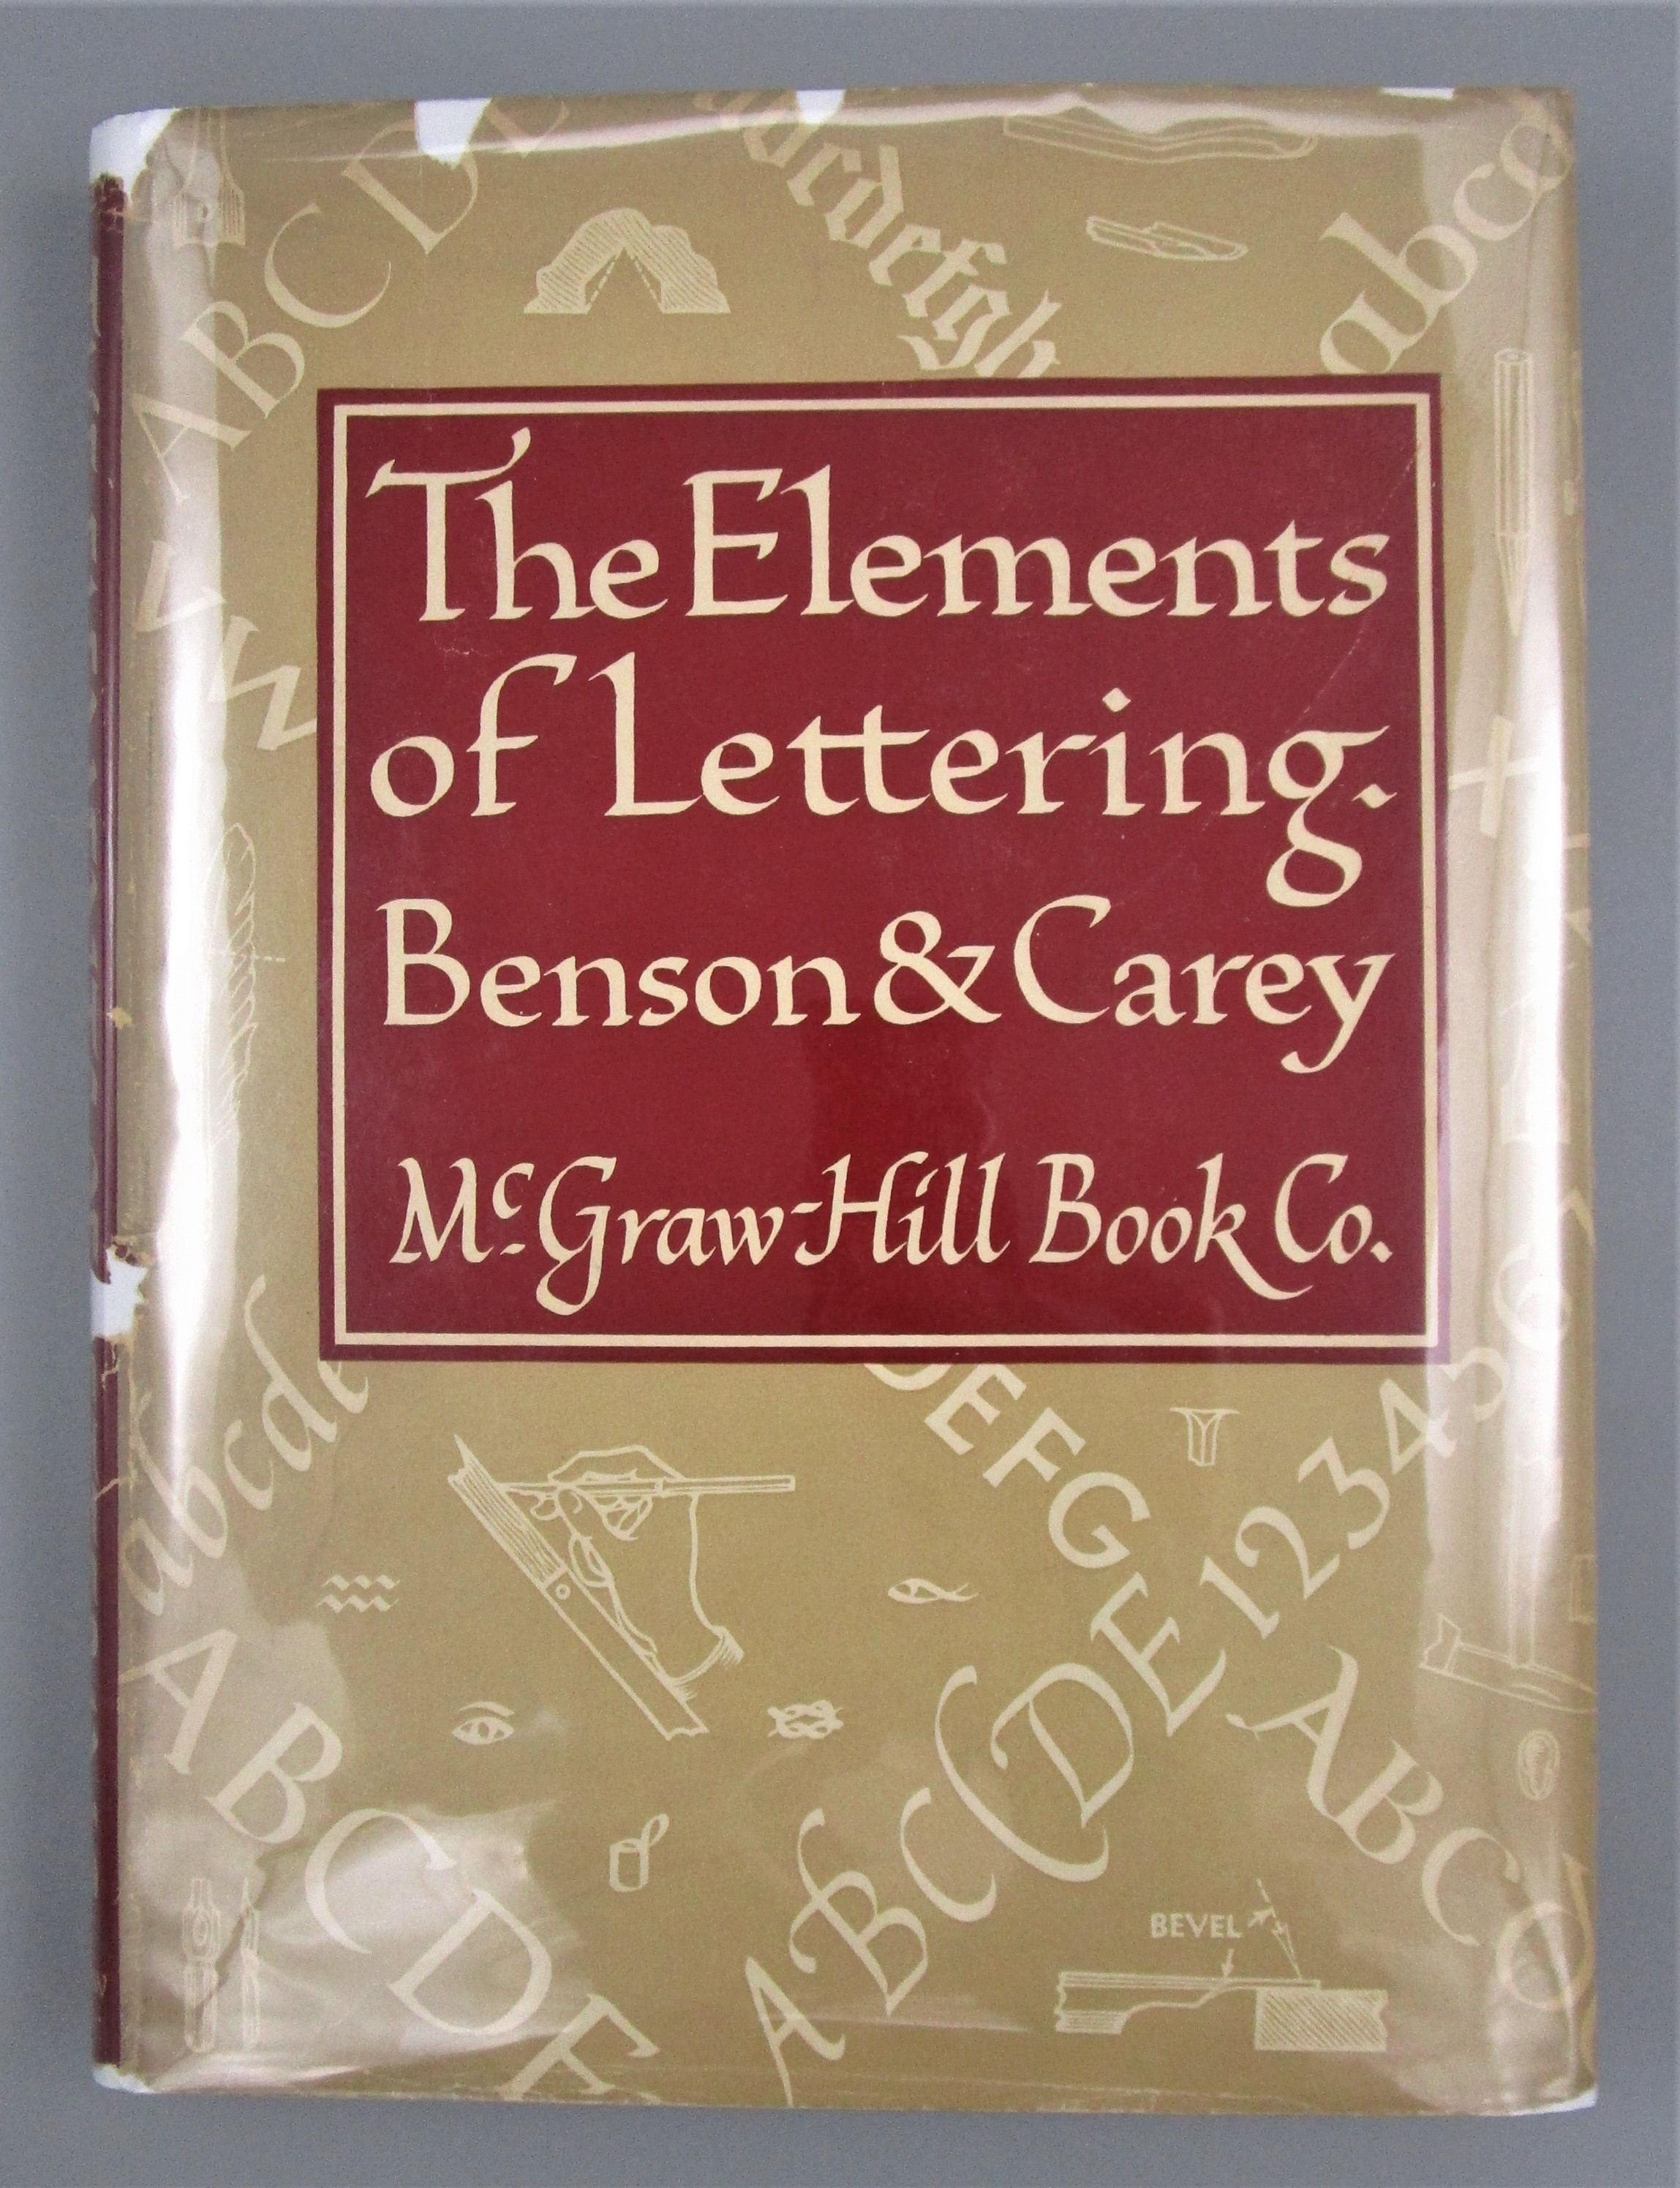 THE ELEMENTS OF LETTERING, by Benson & Carey - 1950 [2nd Ed]